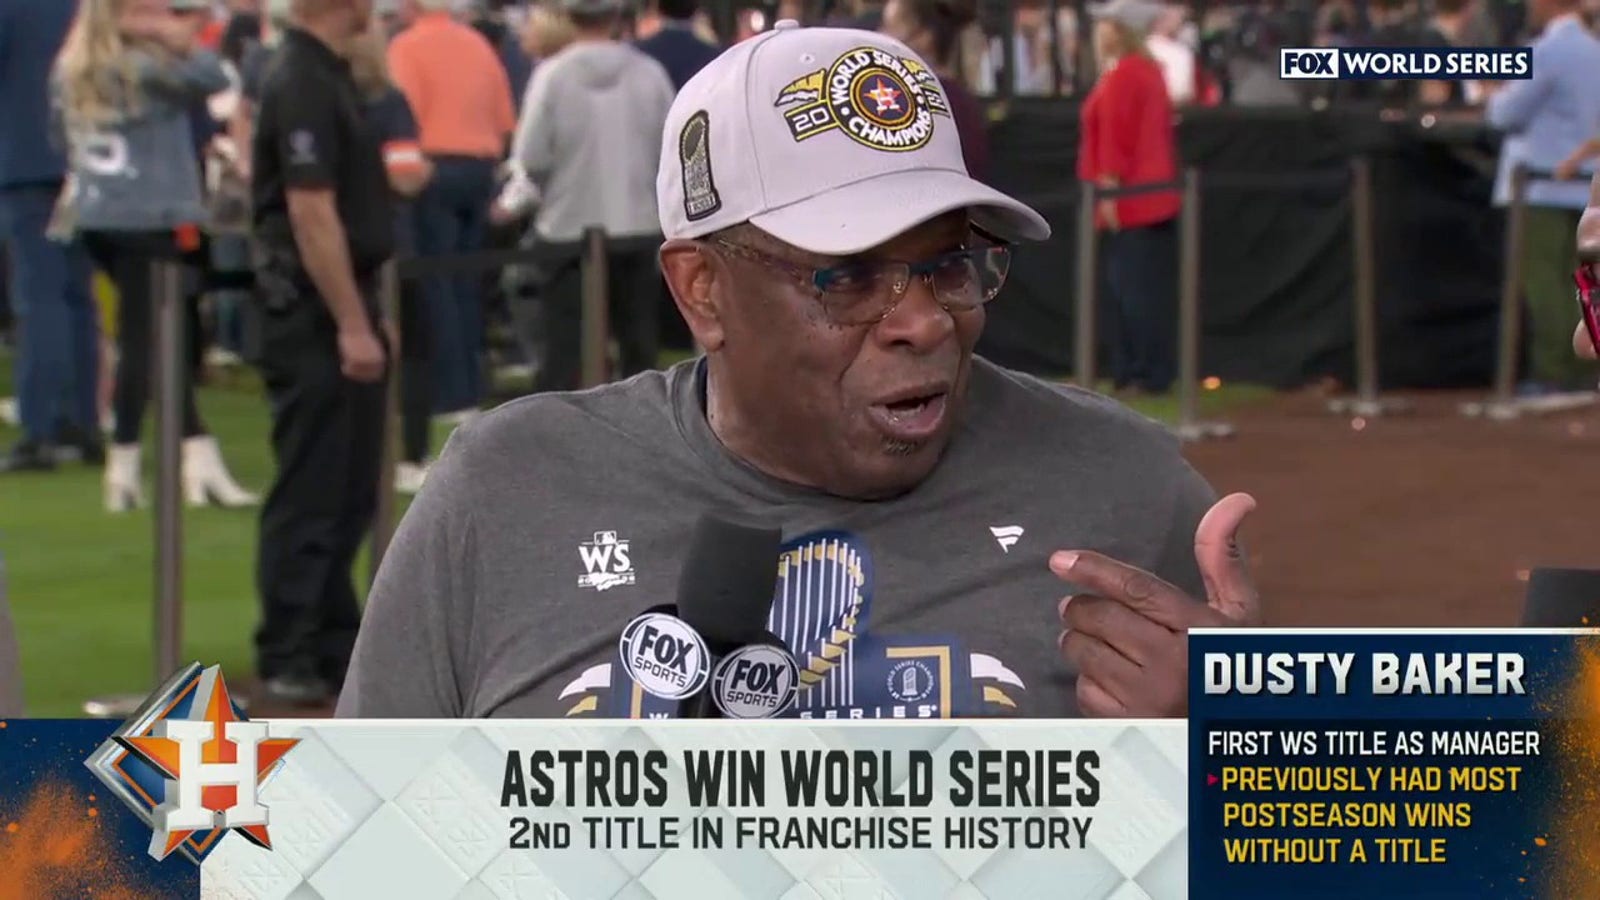 Beryl TV play-602da7214001099--26419929240 2022 World Series: After 25 years, Astros manager Dusty Baker gets his ring Sports 